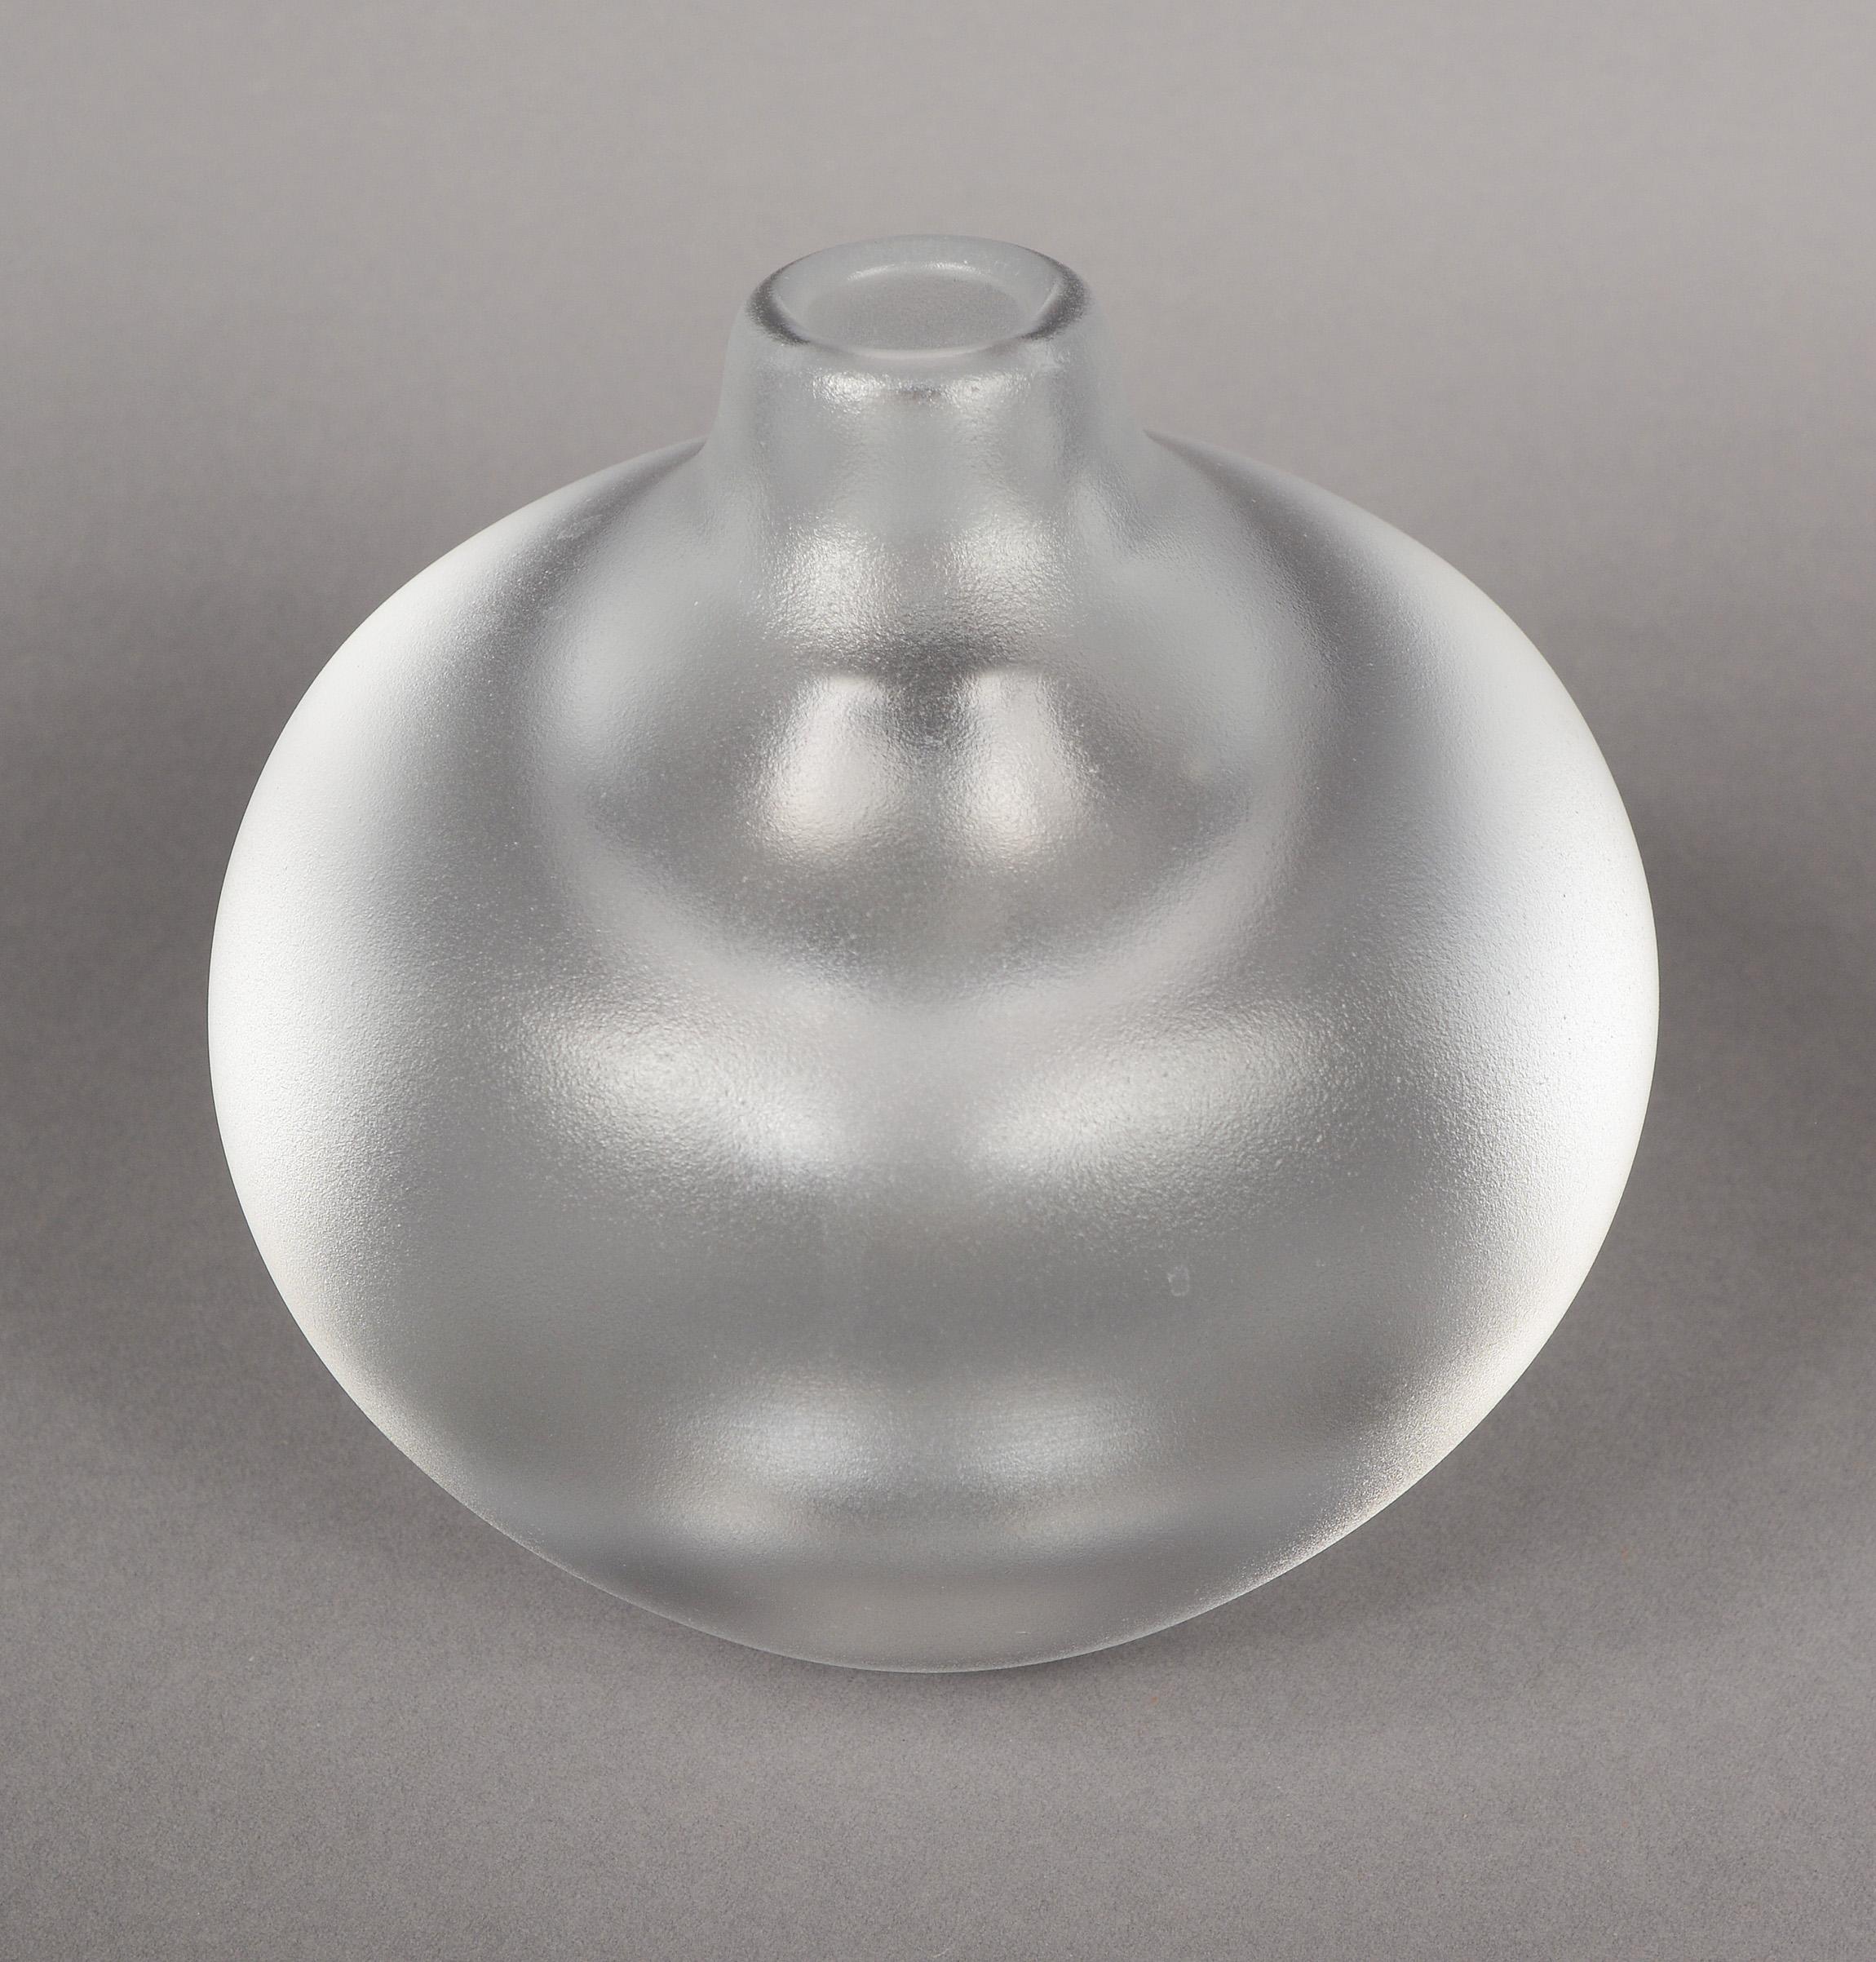 Vase from the Kosta Royal Art Collection designed by Goran Warff. This vase has very thick walls, a large internal bubble in the bottom and an acid treated exterior. All this creates an interesting optical effect. There is a tiny ding on the side of